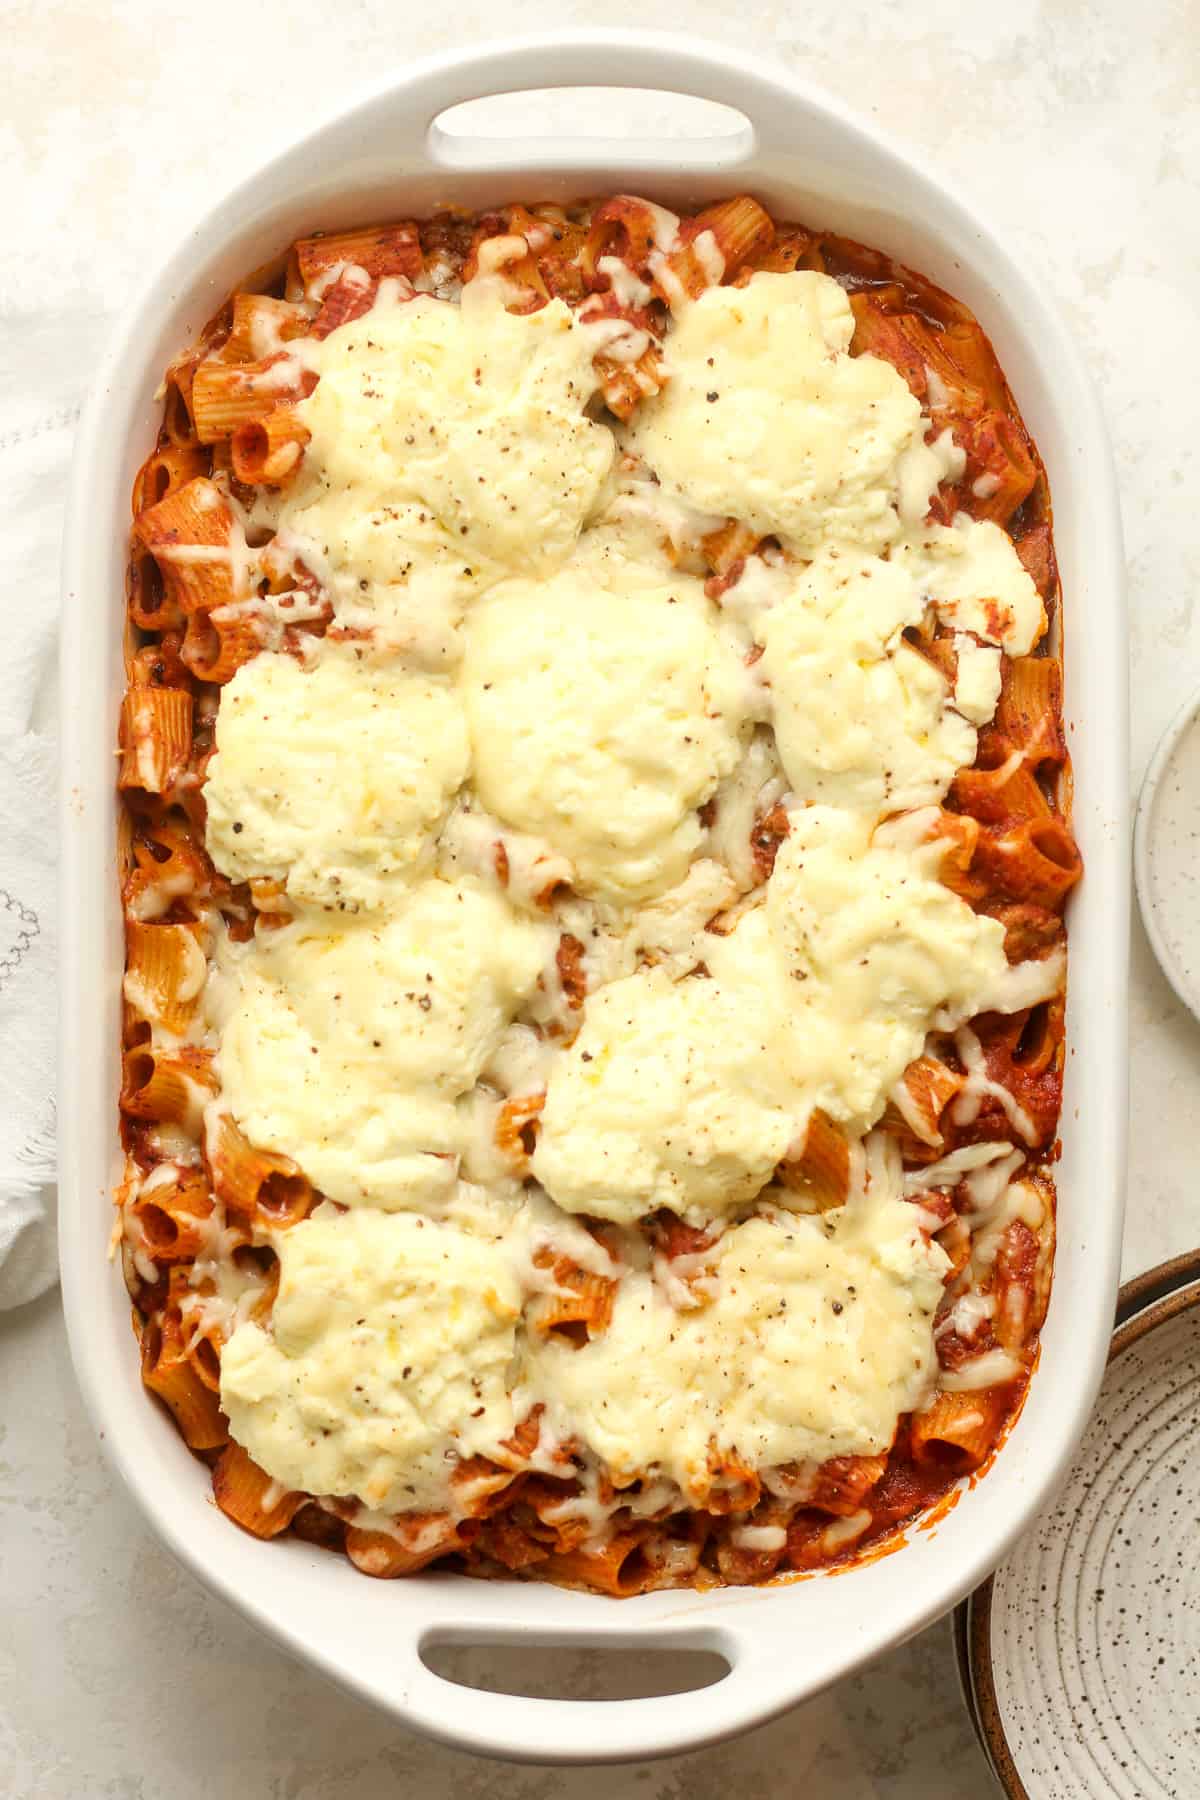 A casserole dish of baked rigatoni with dollops of ricotta cheese.